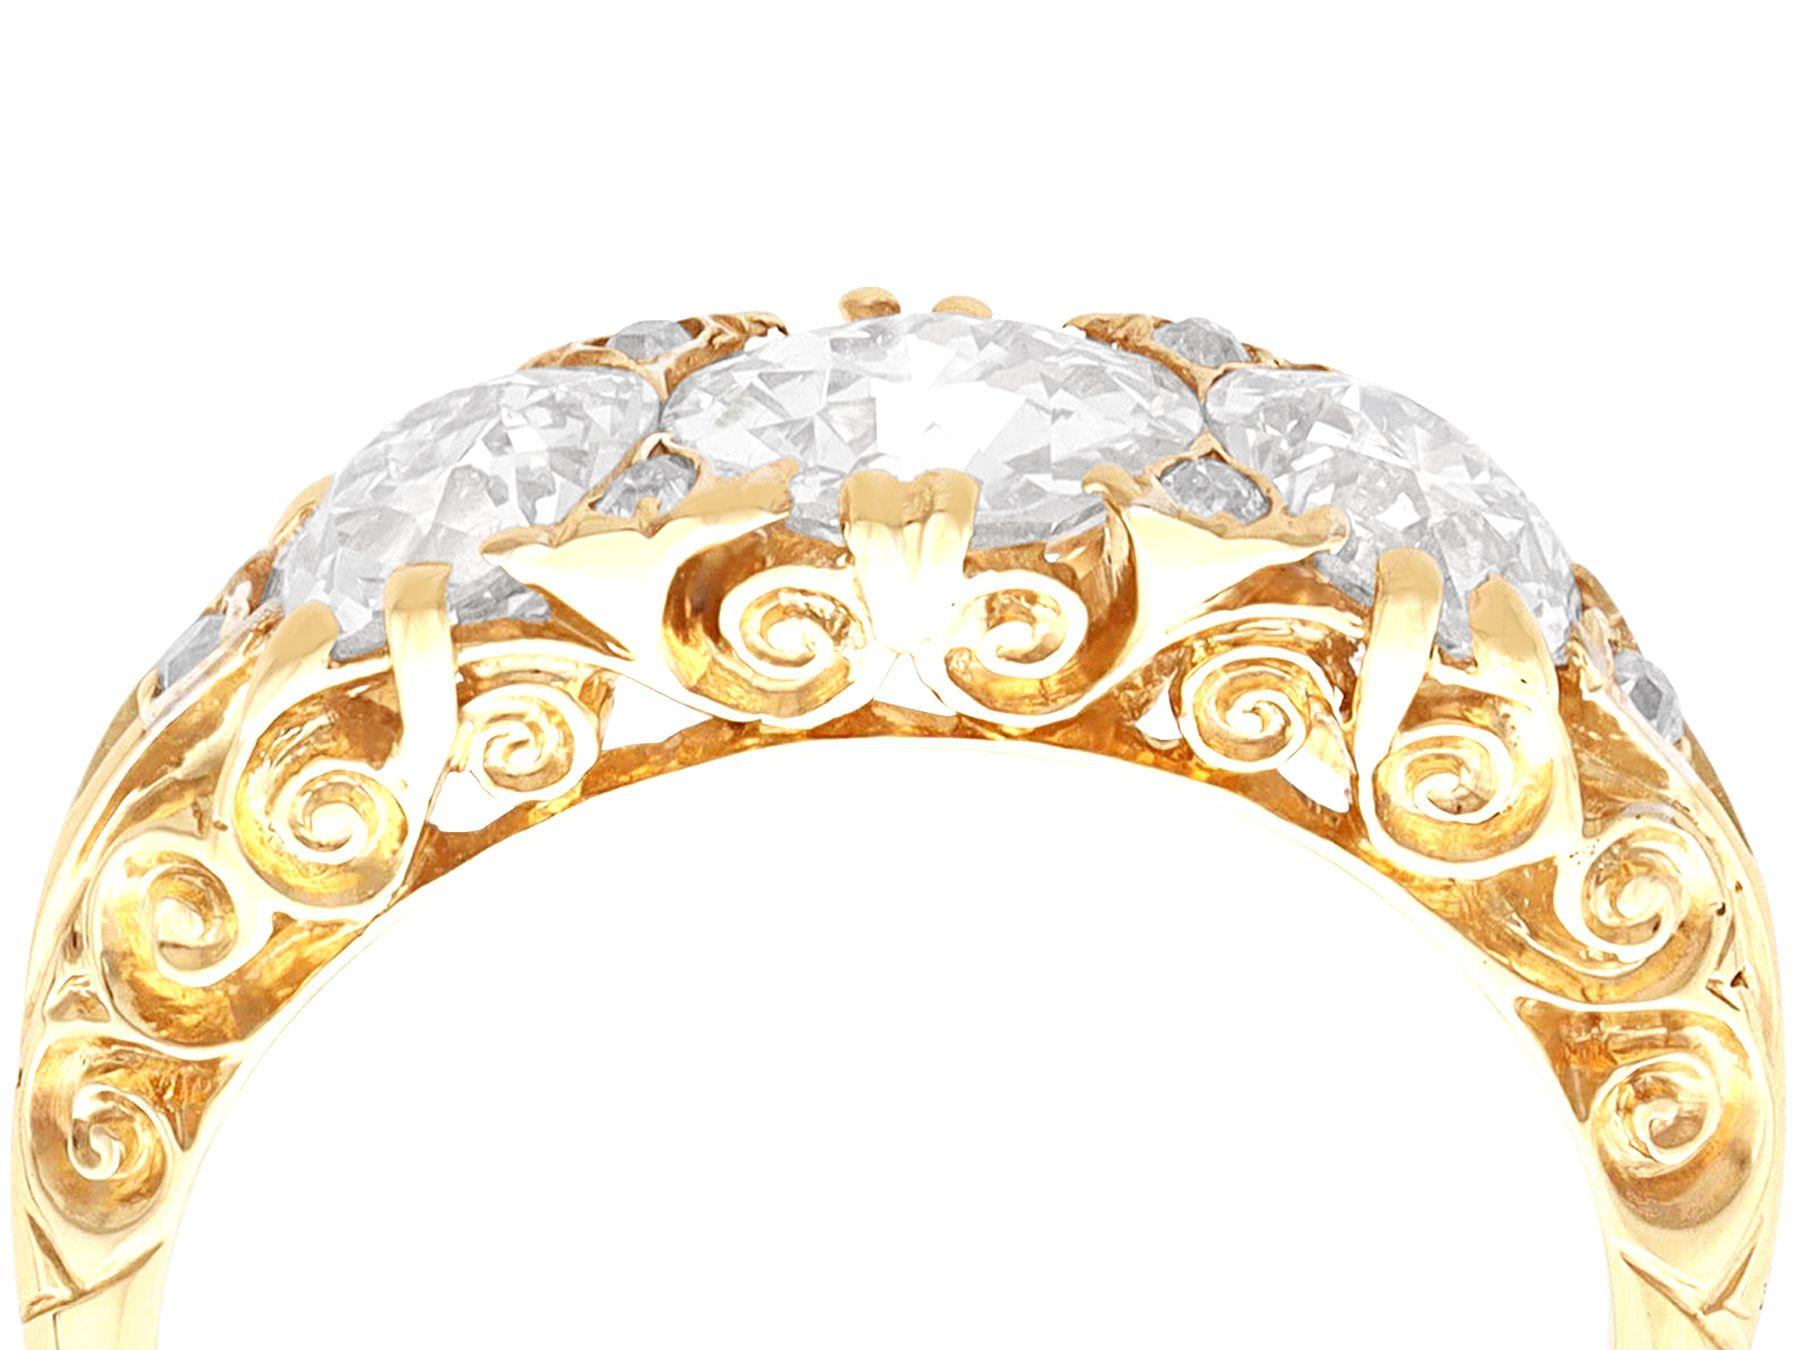 A stunning, fine and impressive antique Victorian 2.56 carat diamond and 18 karat yellow gold three stone ring; part of our antique jewelry/estate jewelry collections.

This stunning antique trilogy ring has been crafted in 18k yellow gold.

The